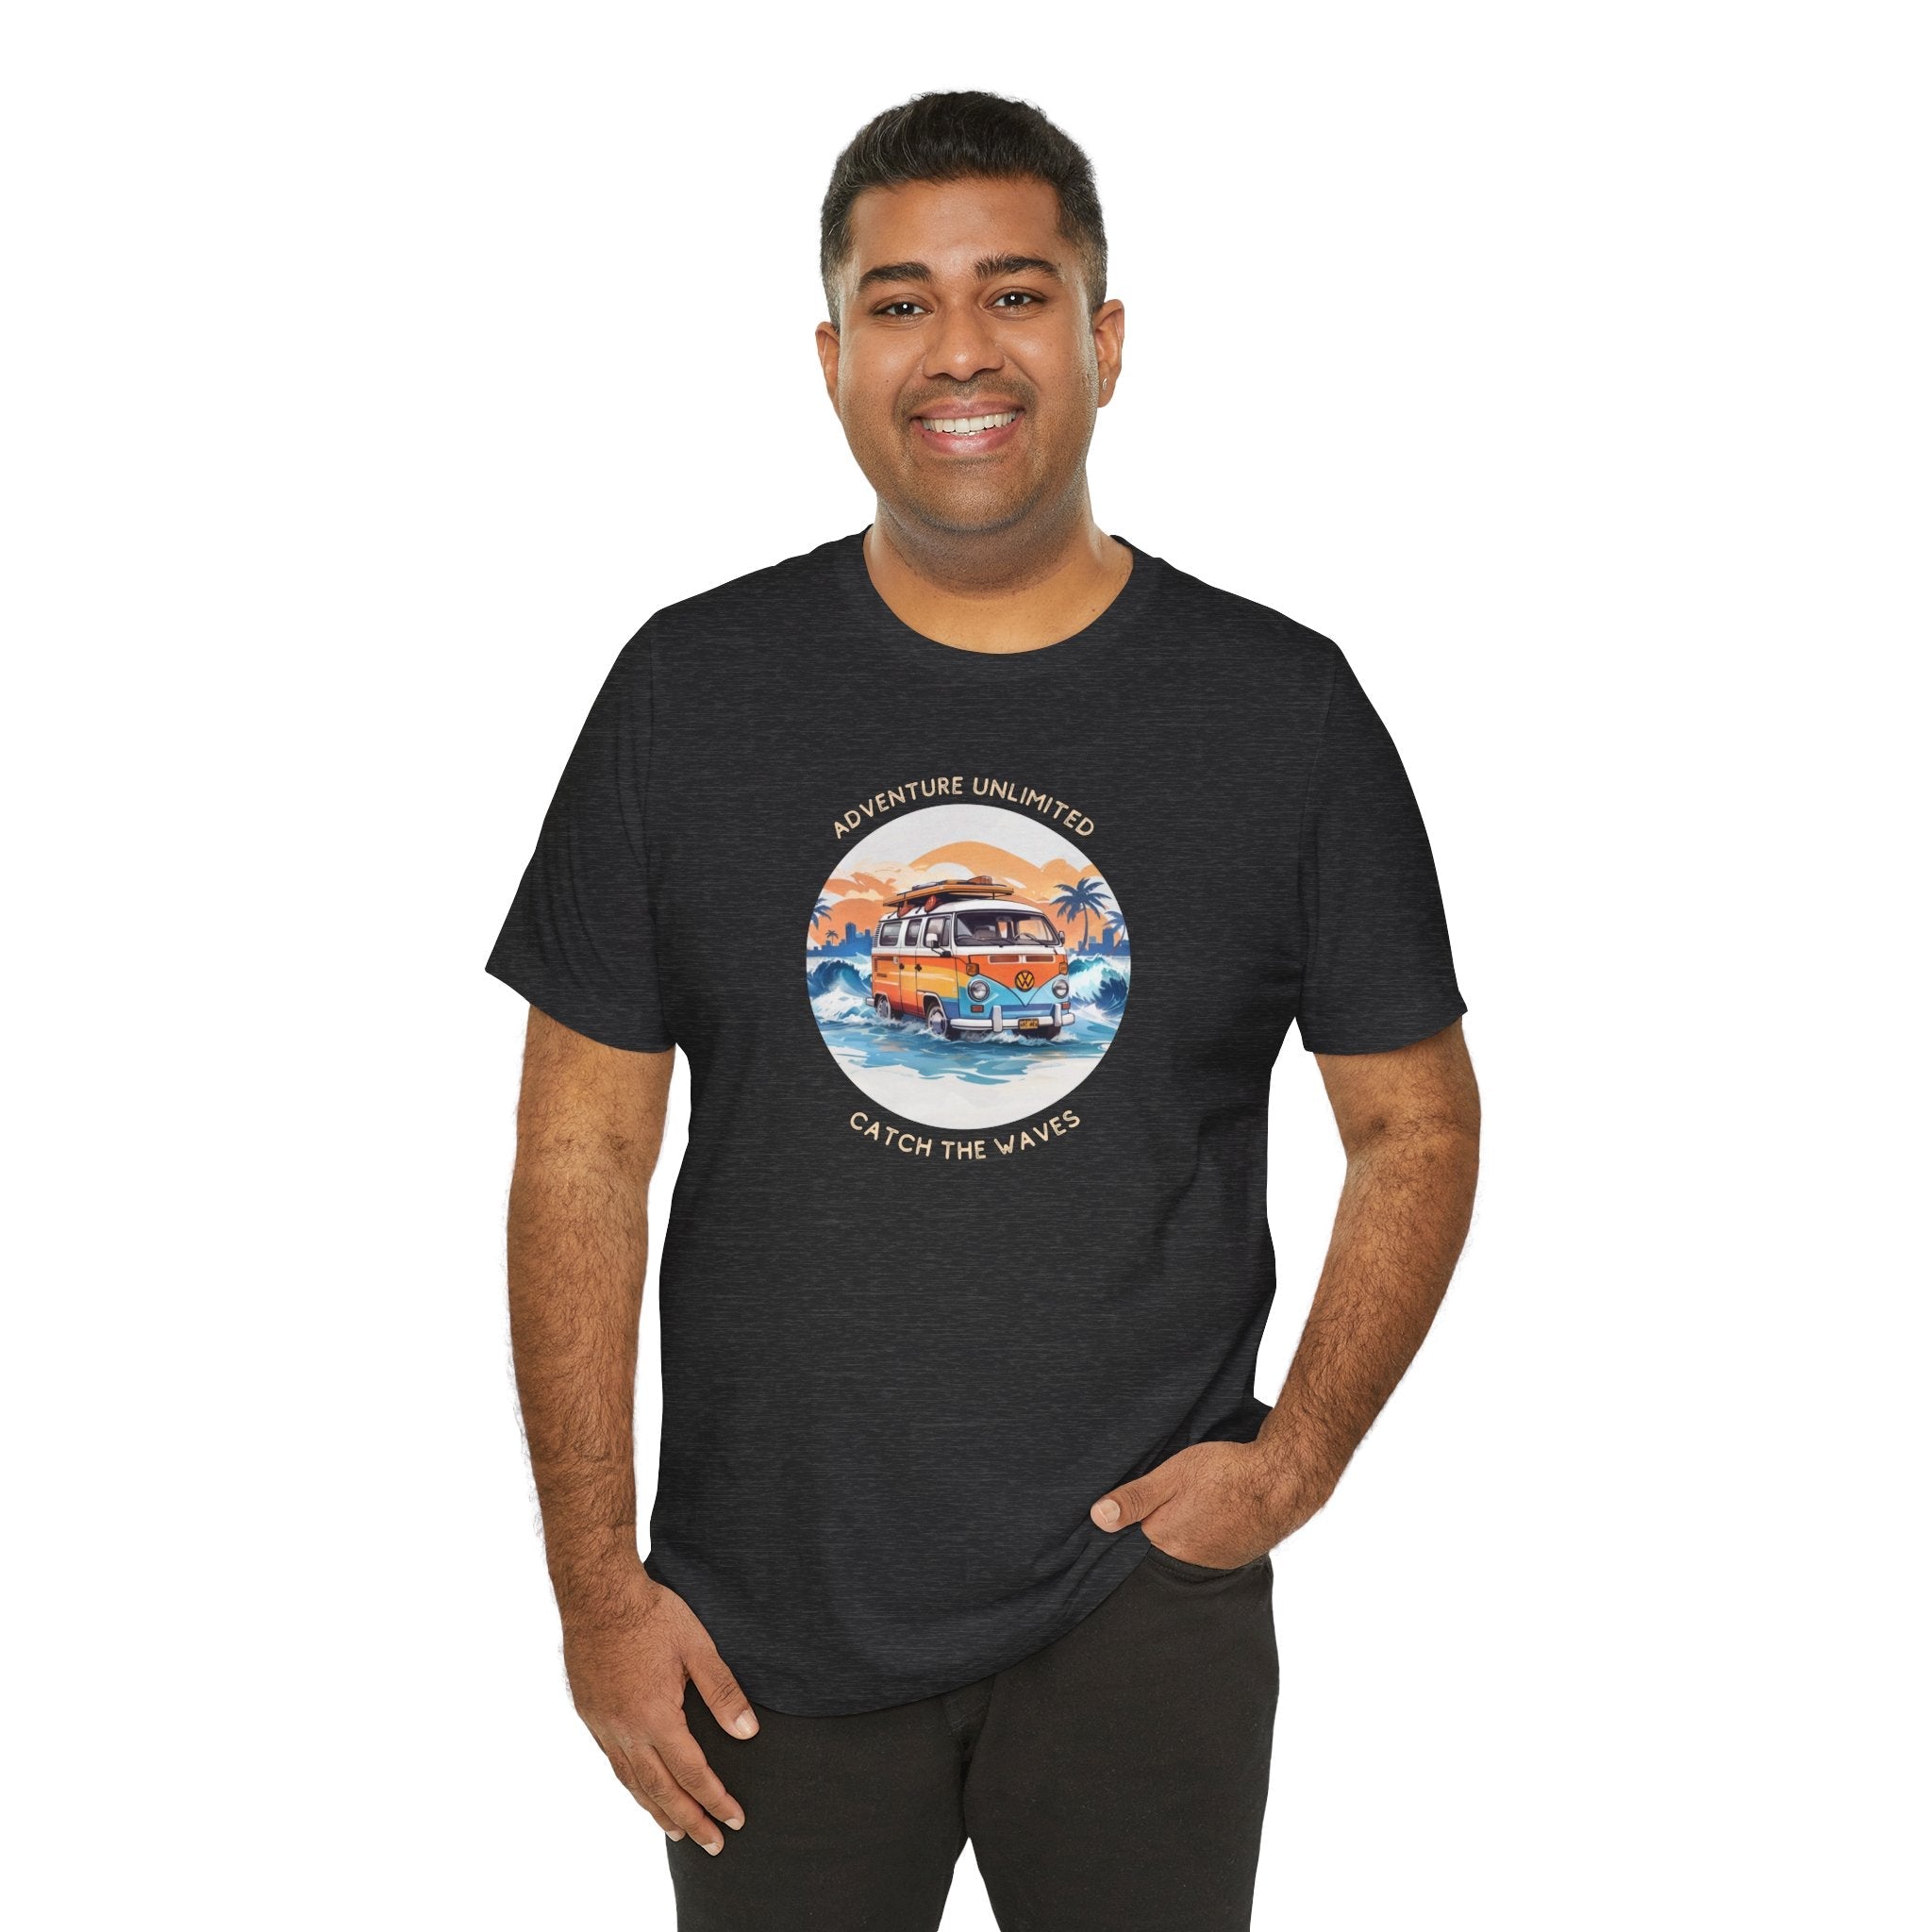 Adventure Unlimited Black T-Shirt with Printed Design